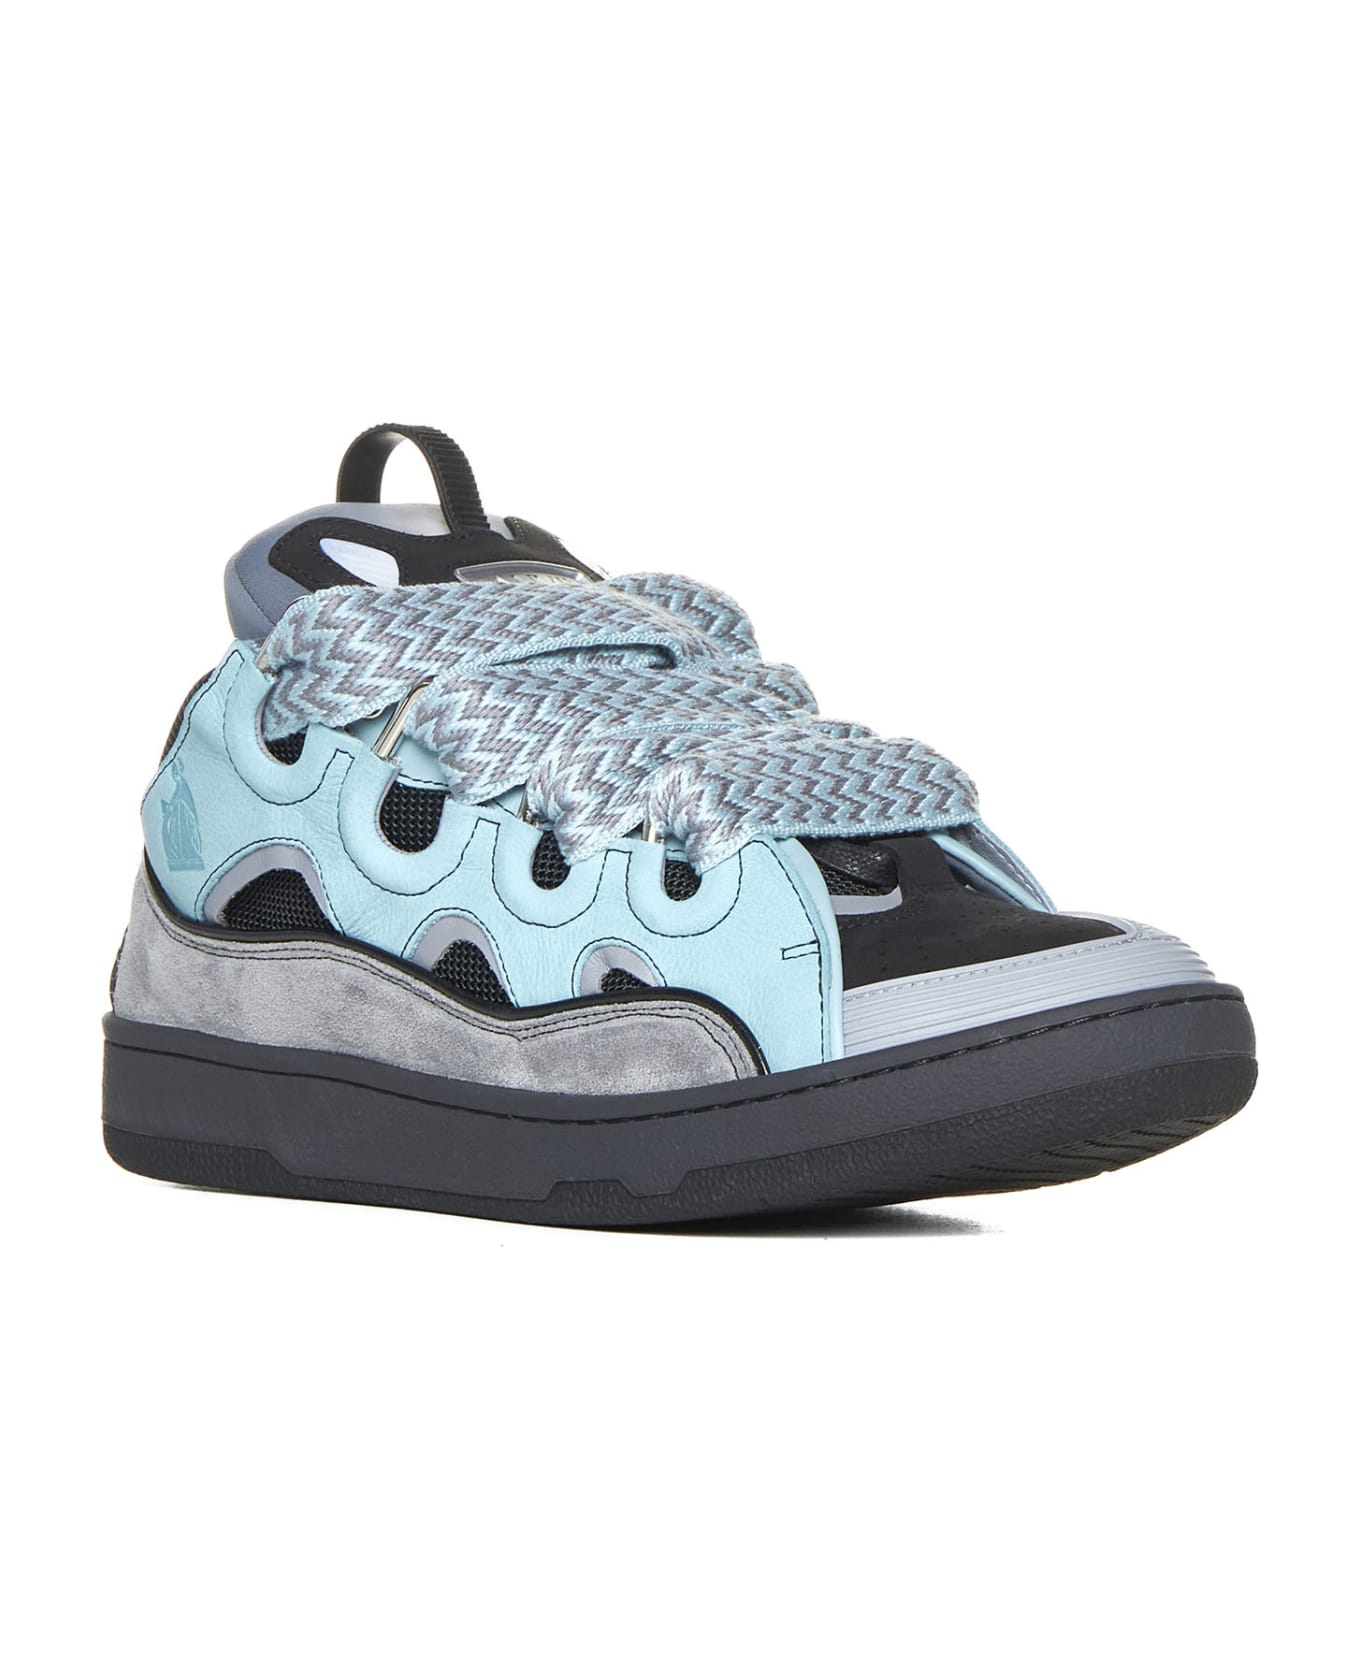 Lanvin Sneakers - Light blue/anthracite